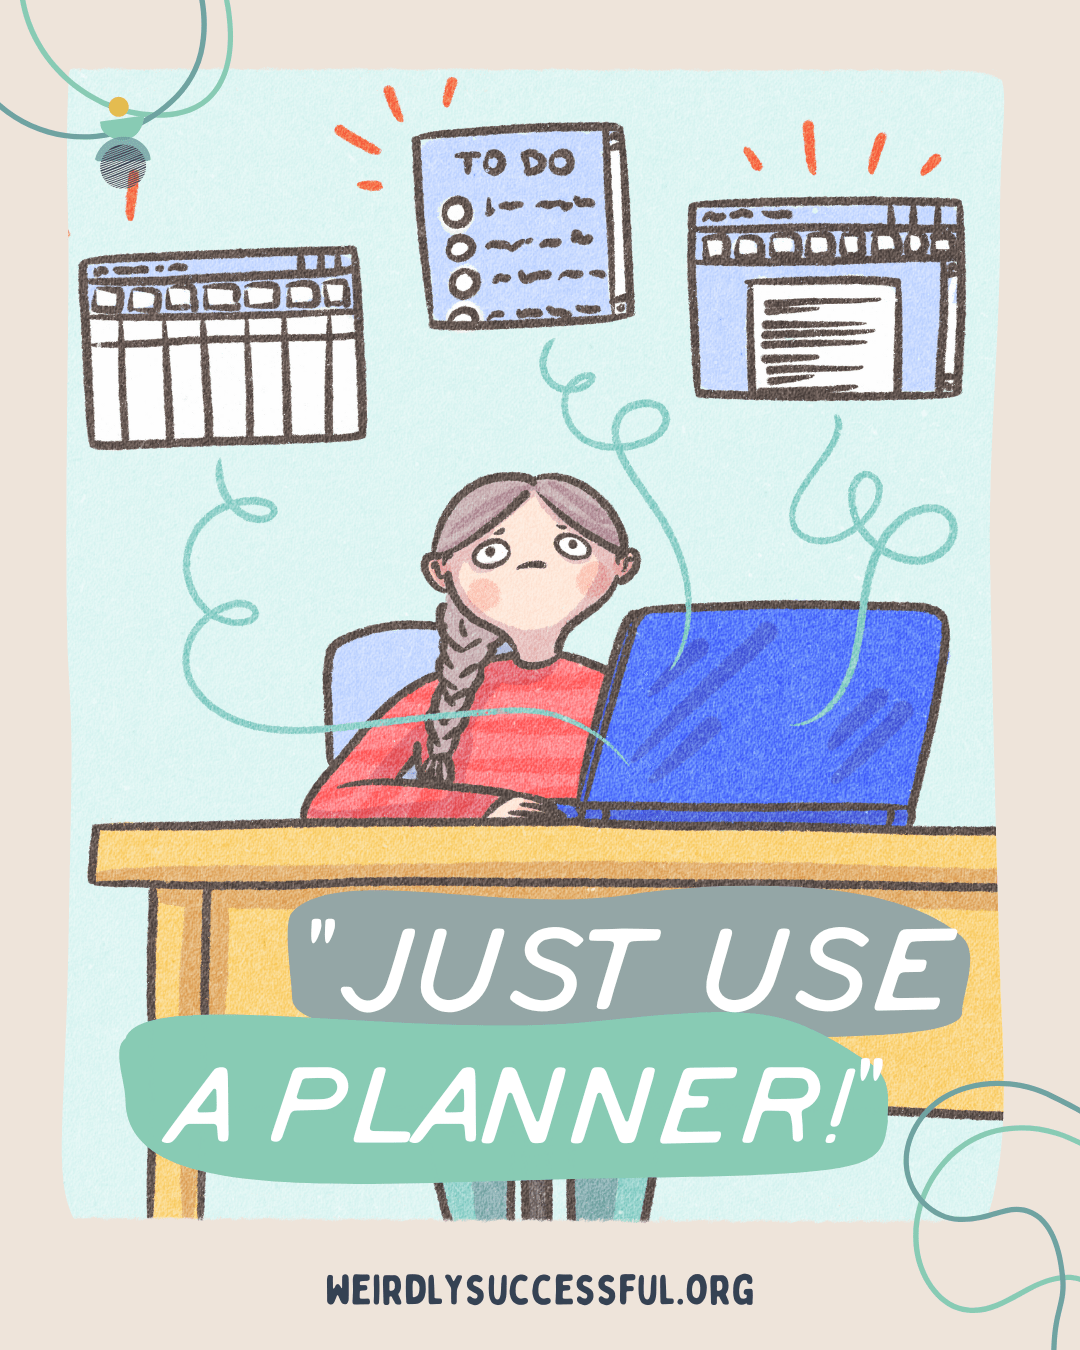 'Just use a planner' is bad advice for ADHD